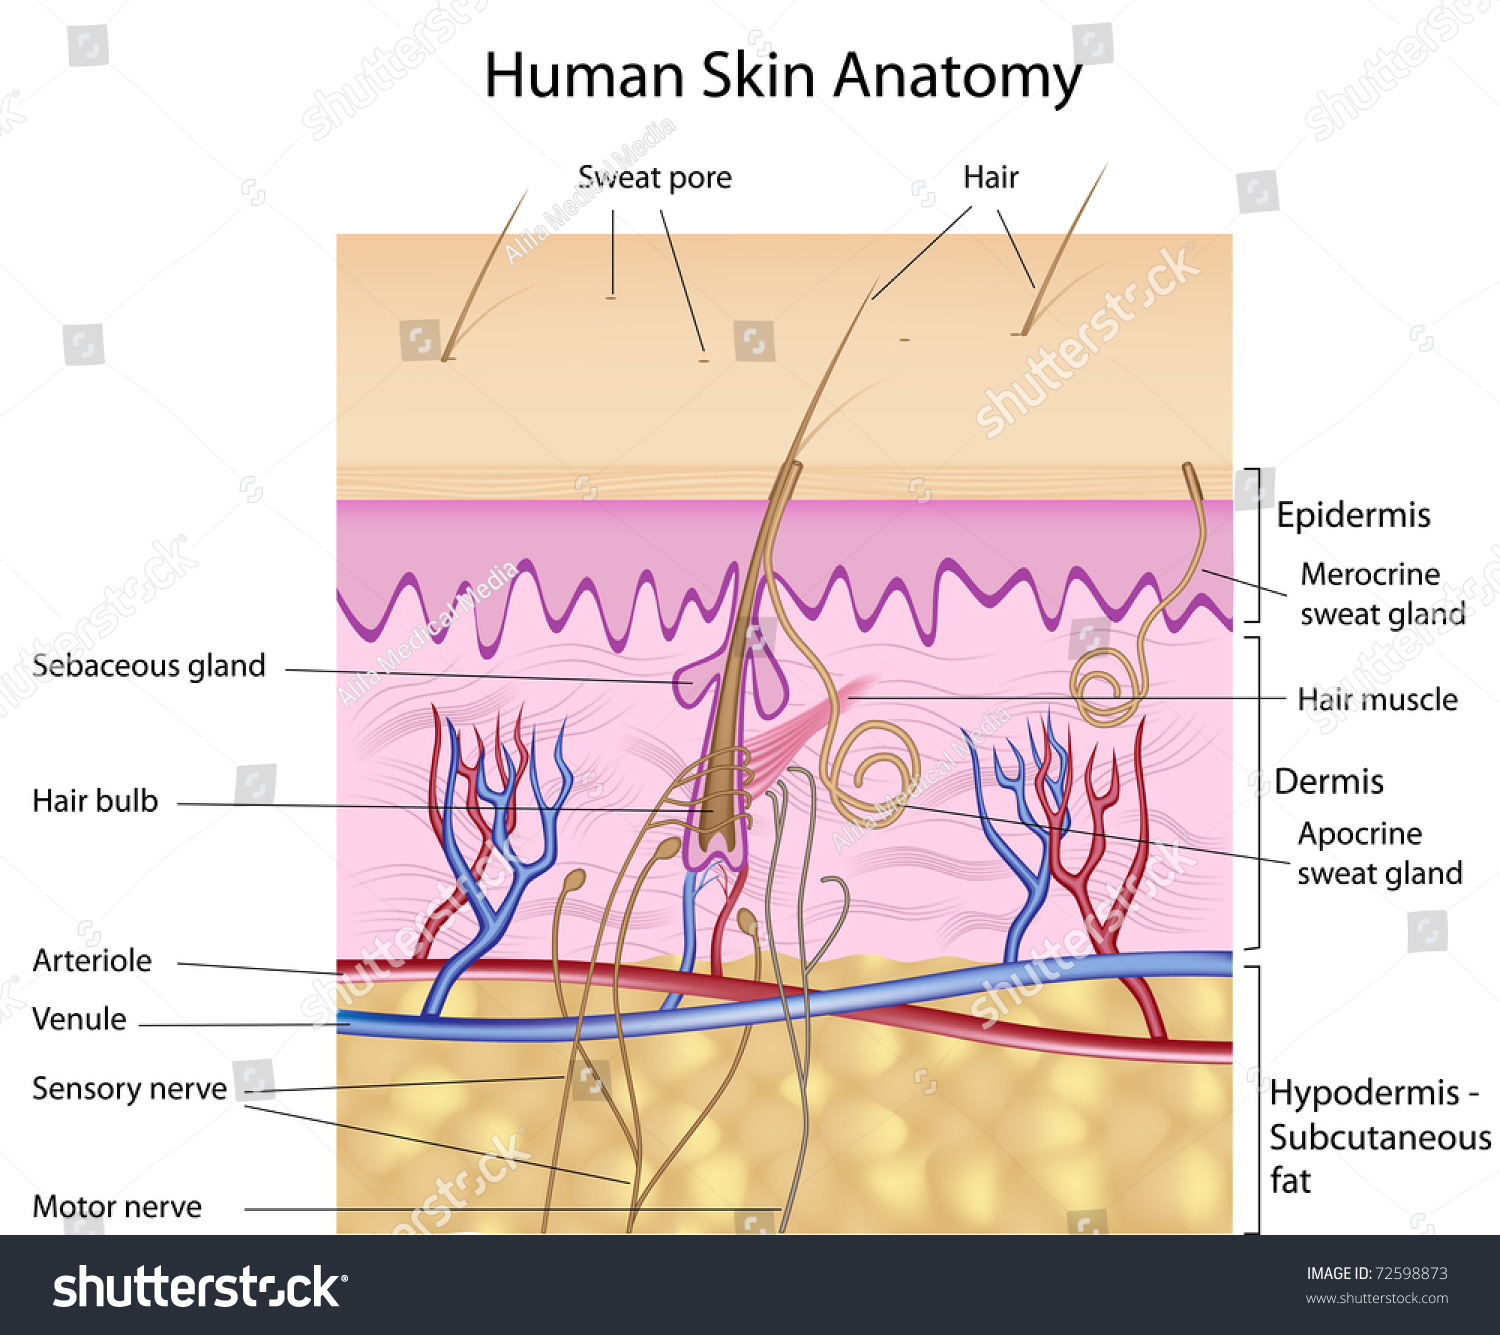 Human Skin Anatomy Detailed And Accurate Royalty Free Stock Photo 72598873 Avopix Com